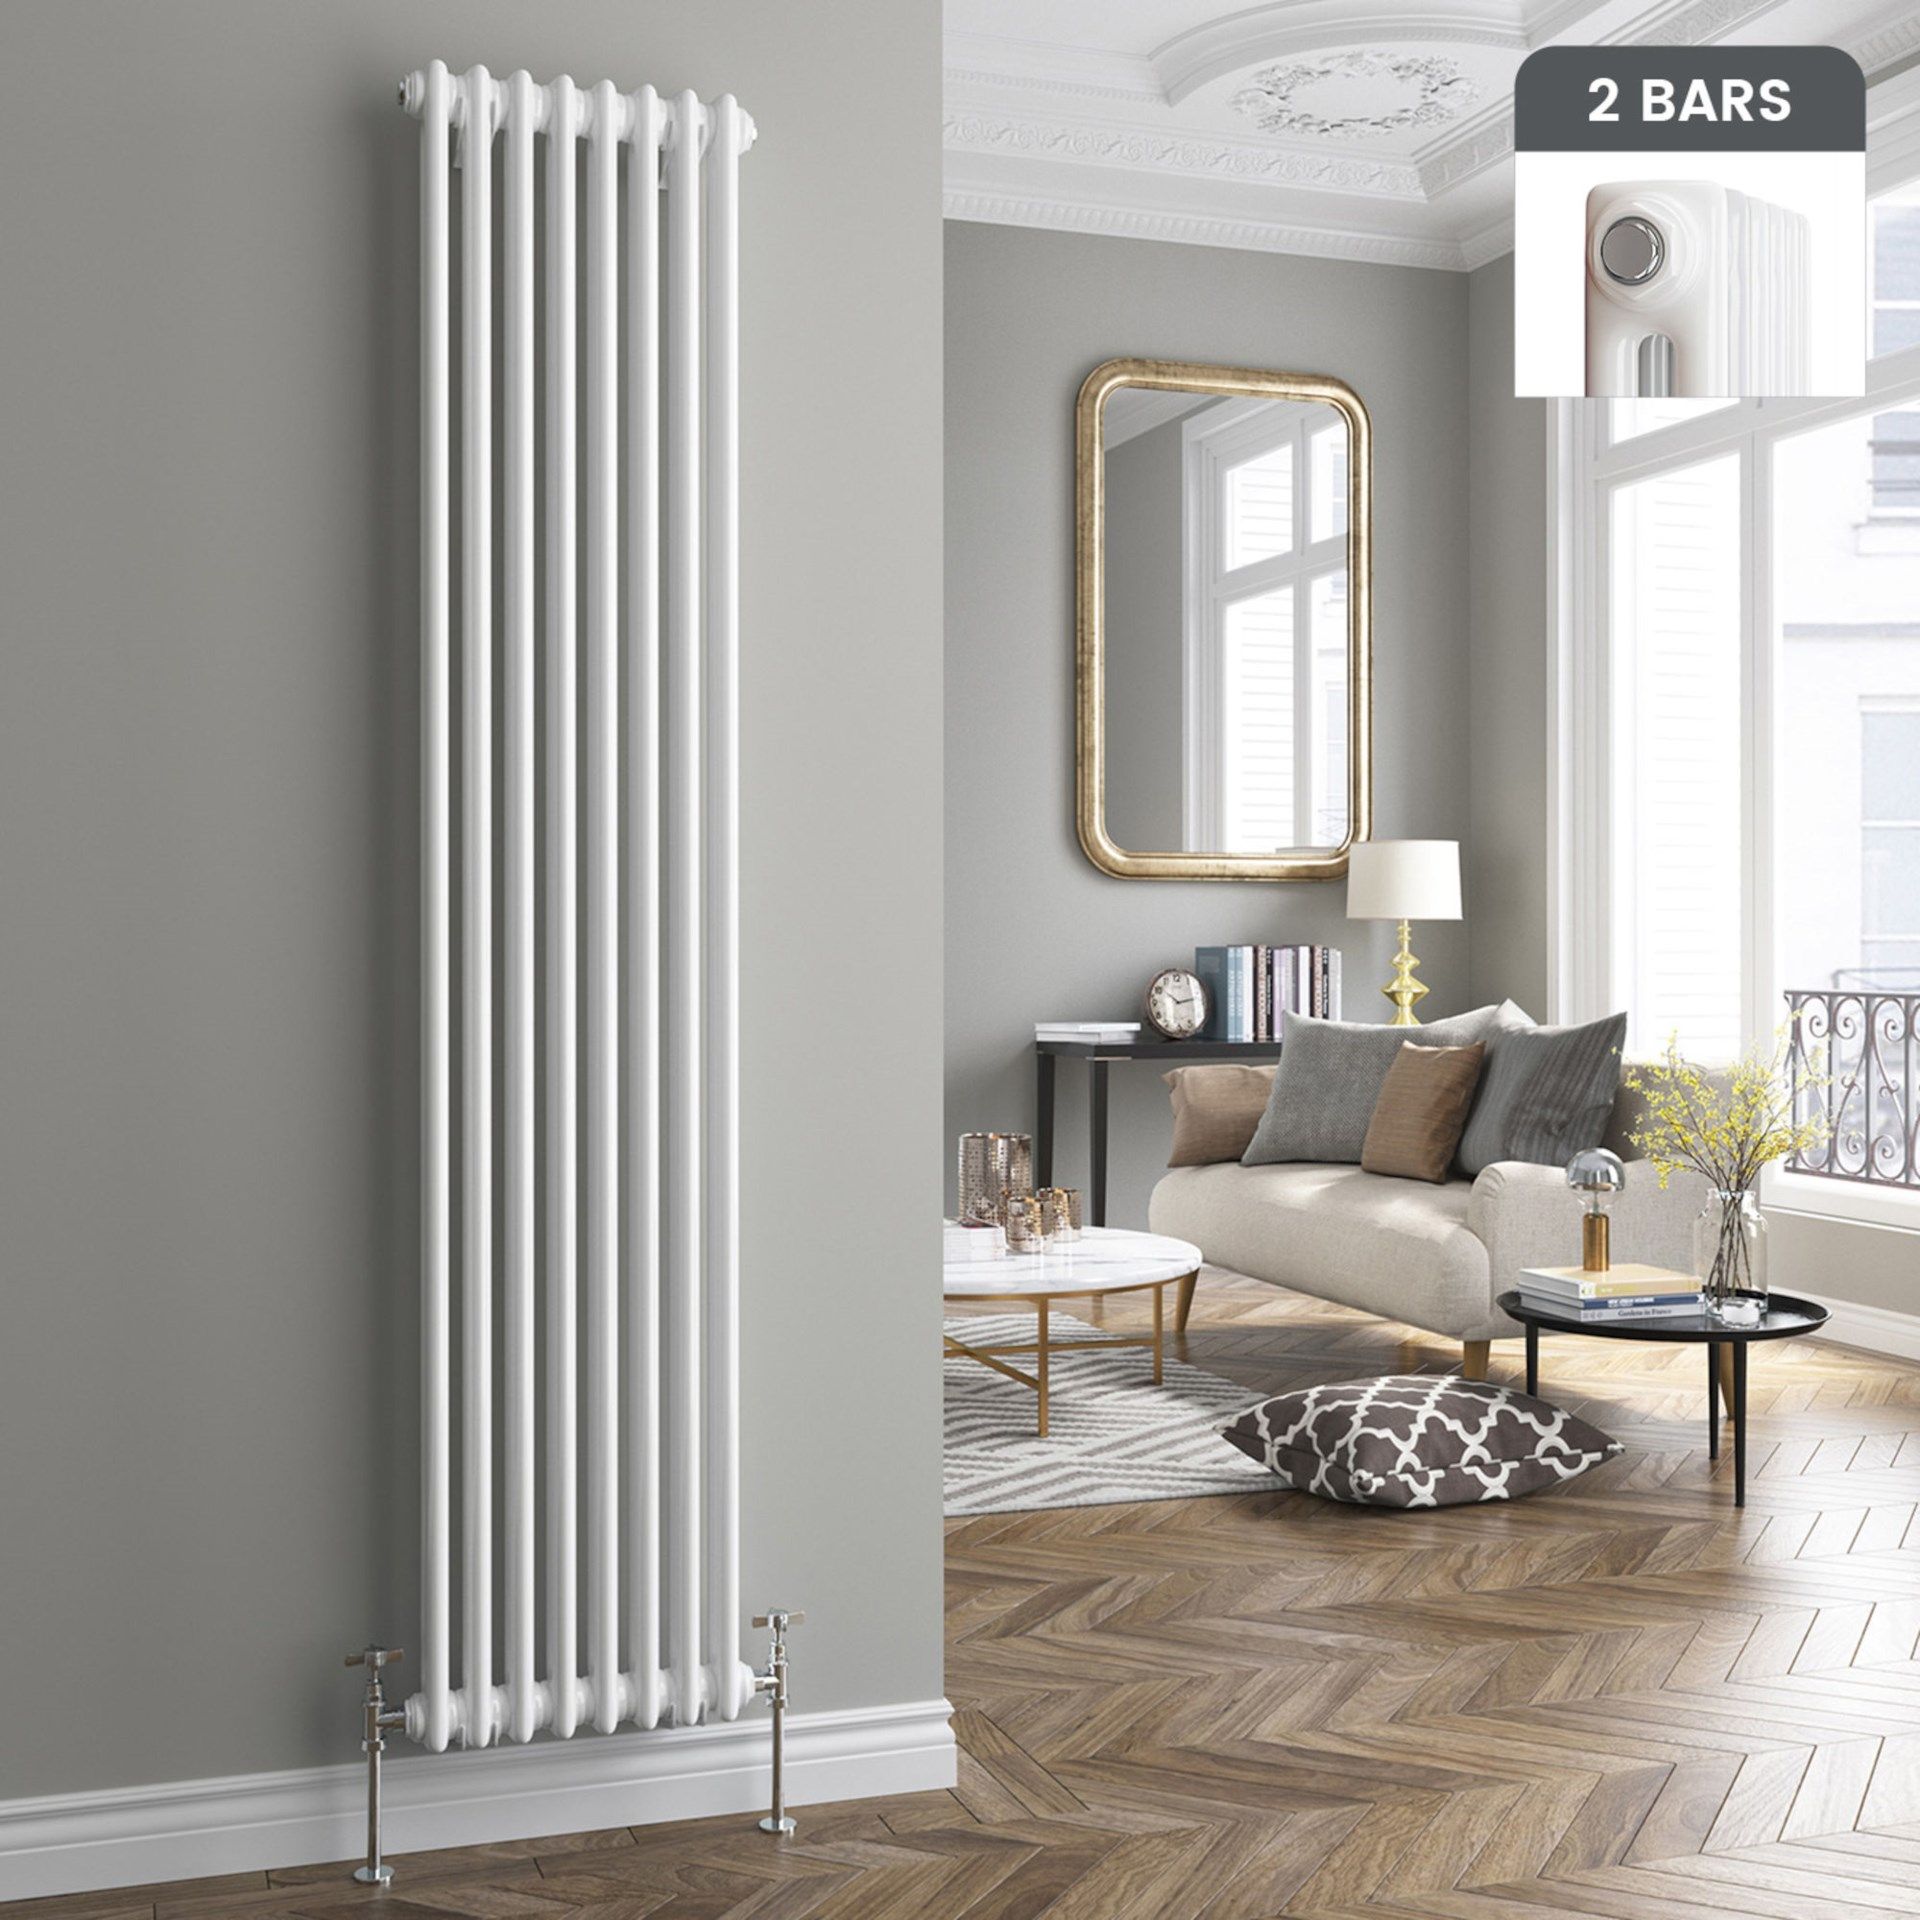 DD112) 2000x350mm White Double Panel Vertical Colosseum Traditional Radiator.RRP £429.99.For a...